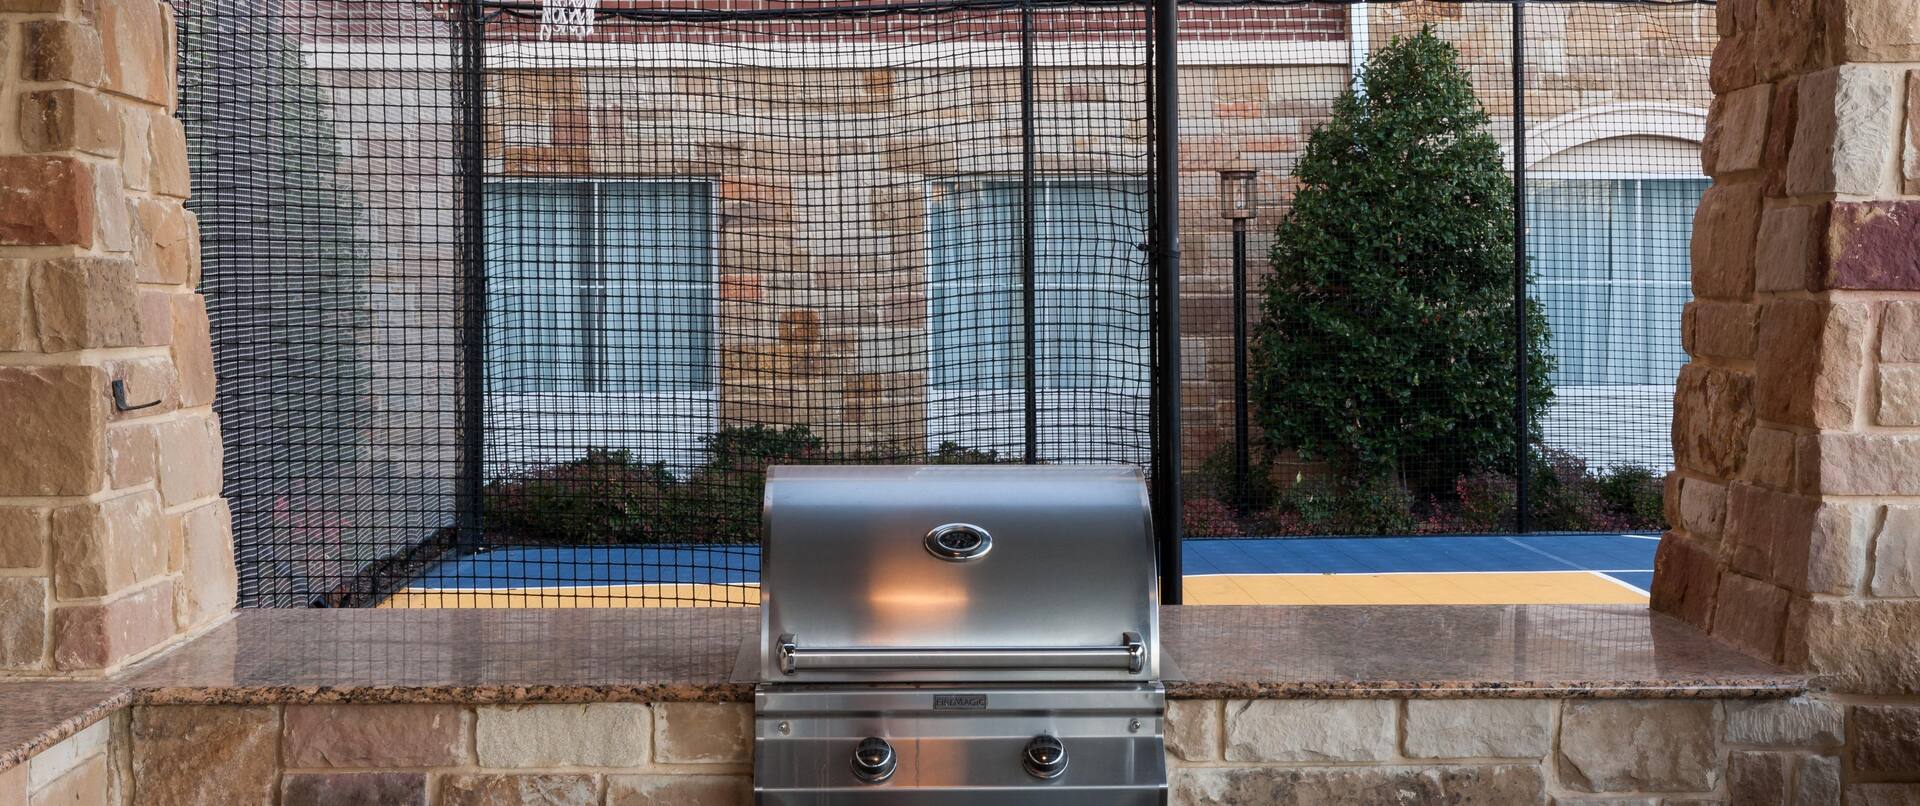 Outdoor Patio Grill and Sport Court